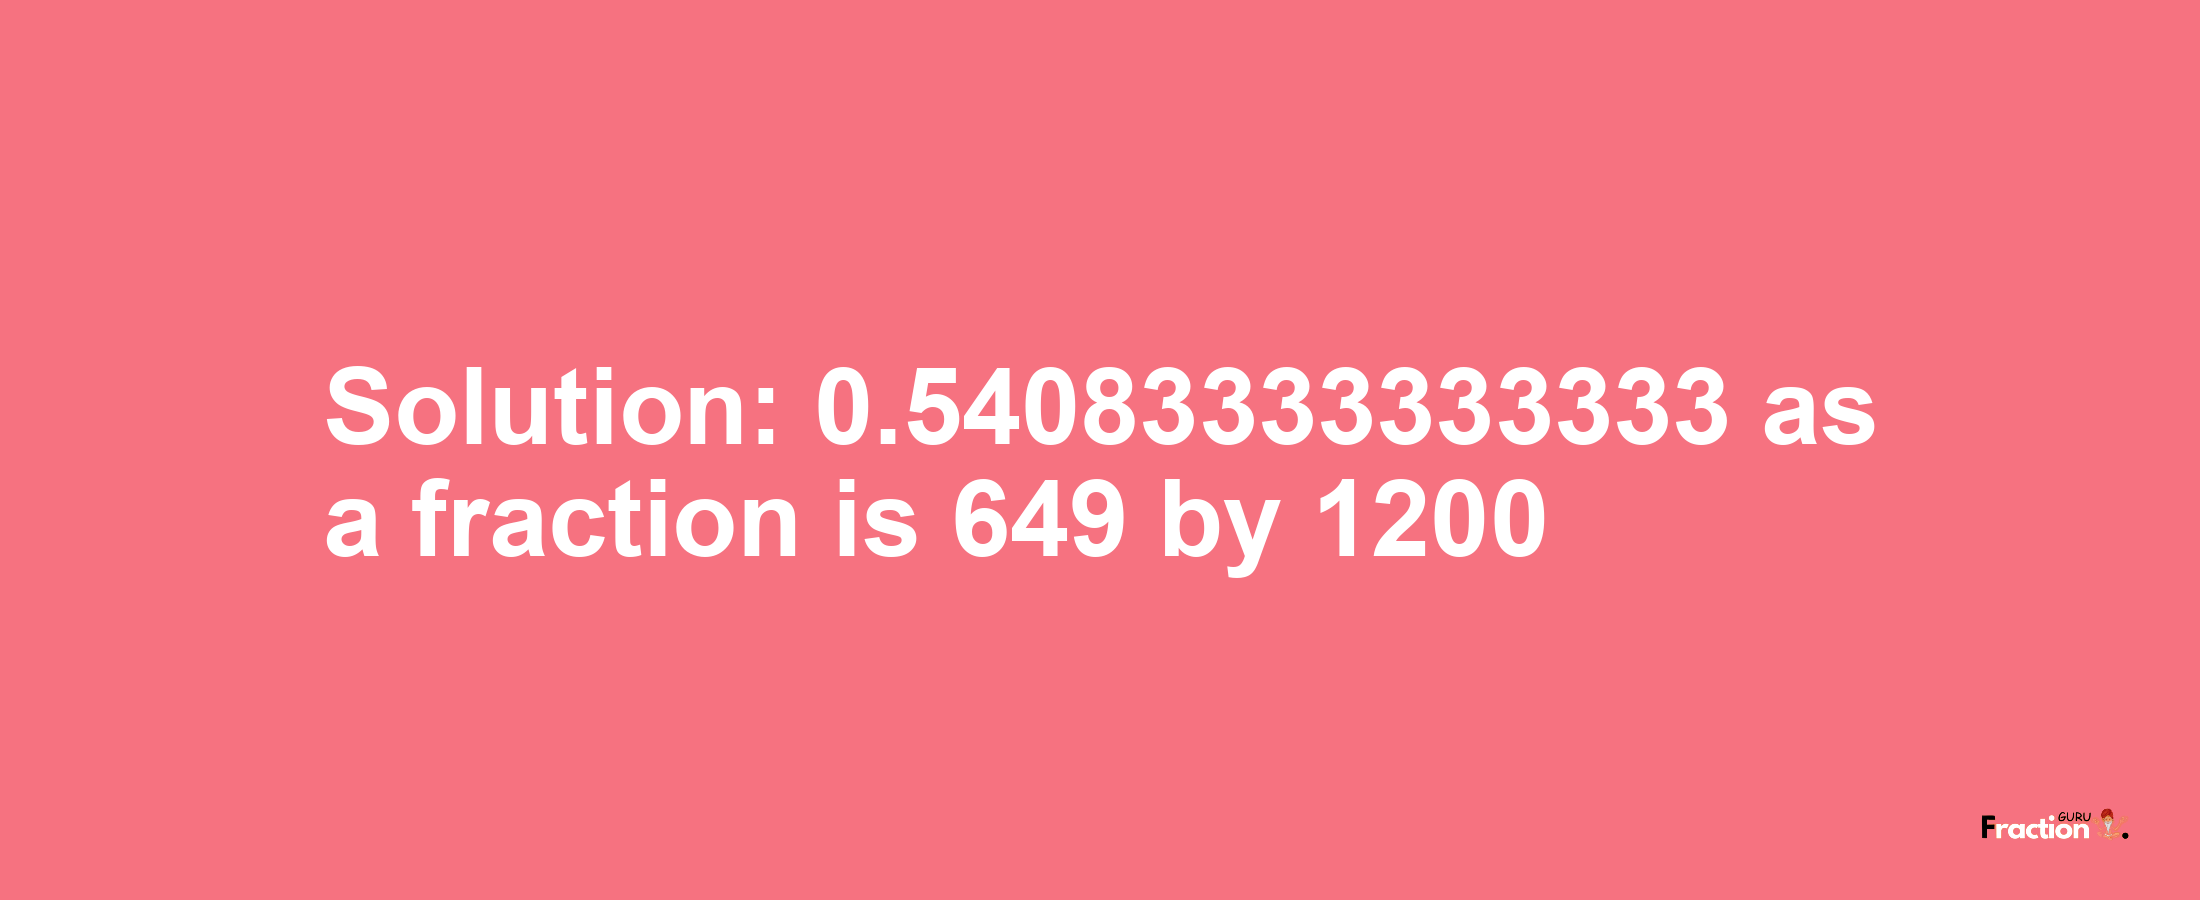 Solution:0.54083333333333 as a fraction is 649/1200